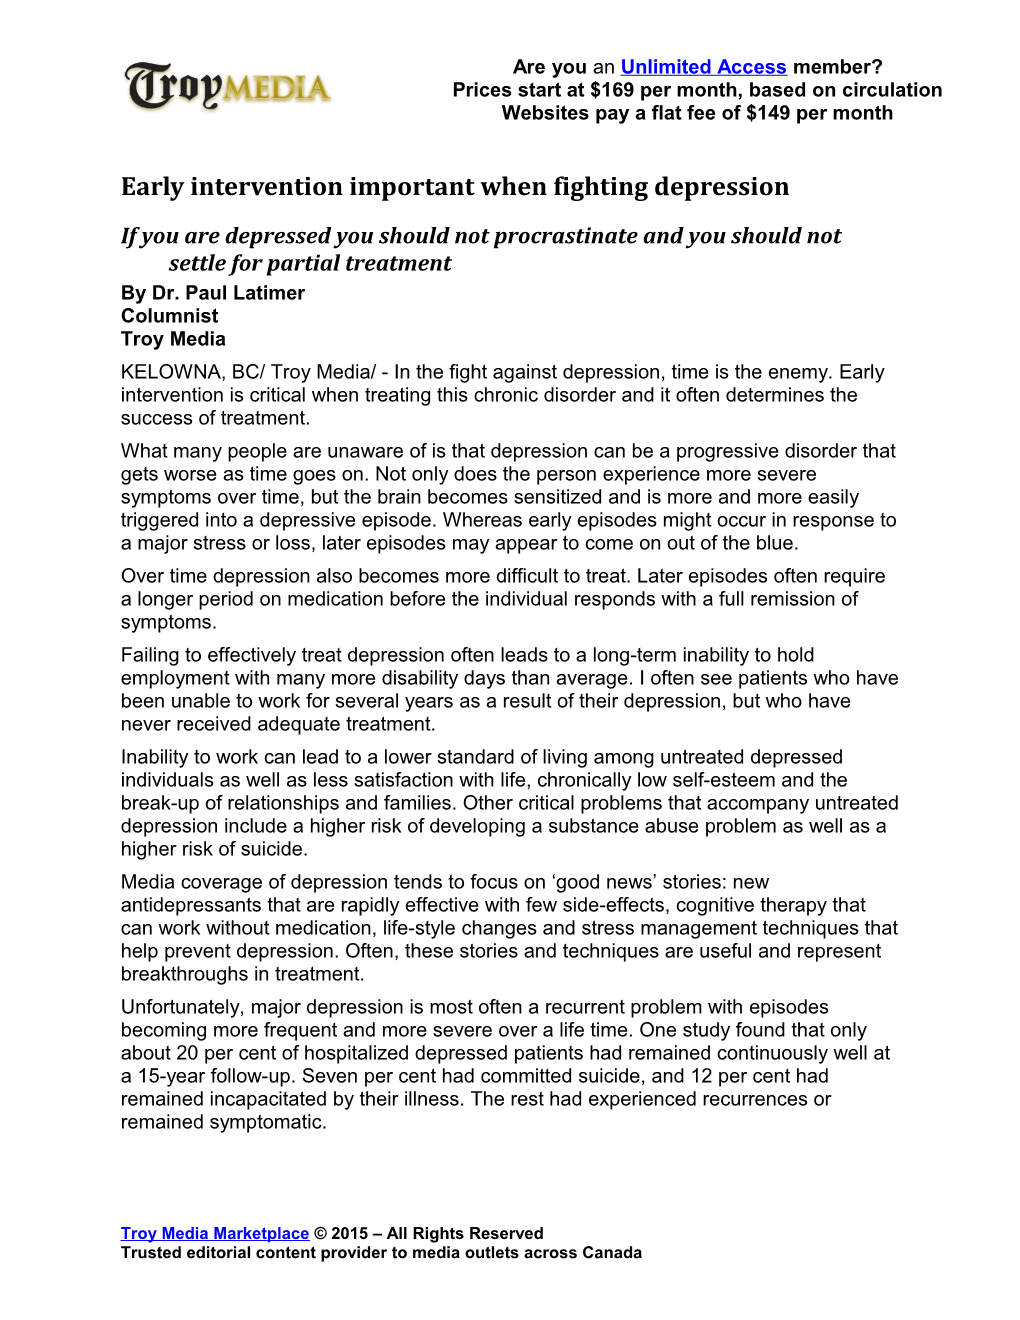 Early Intervention Important When Fighting Depression